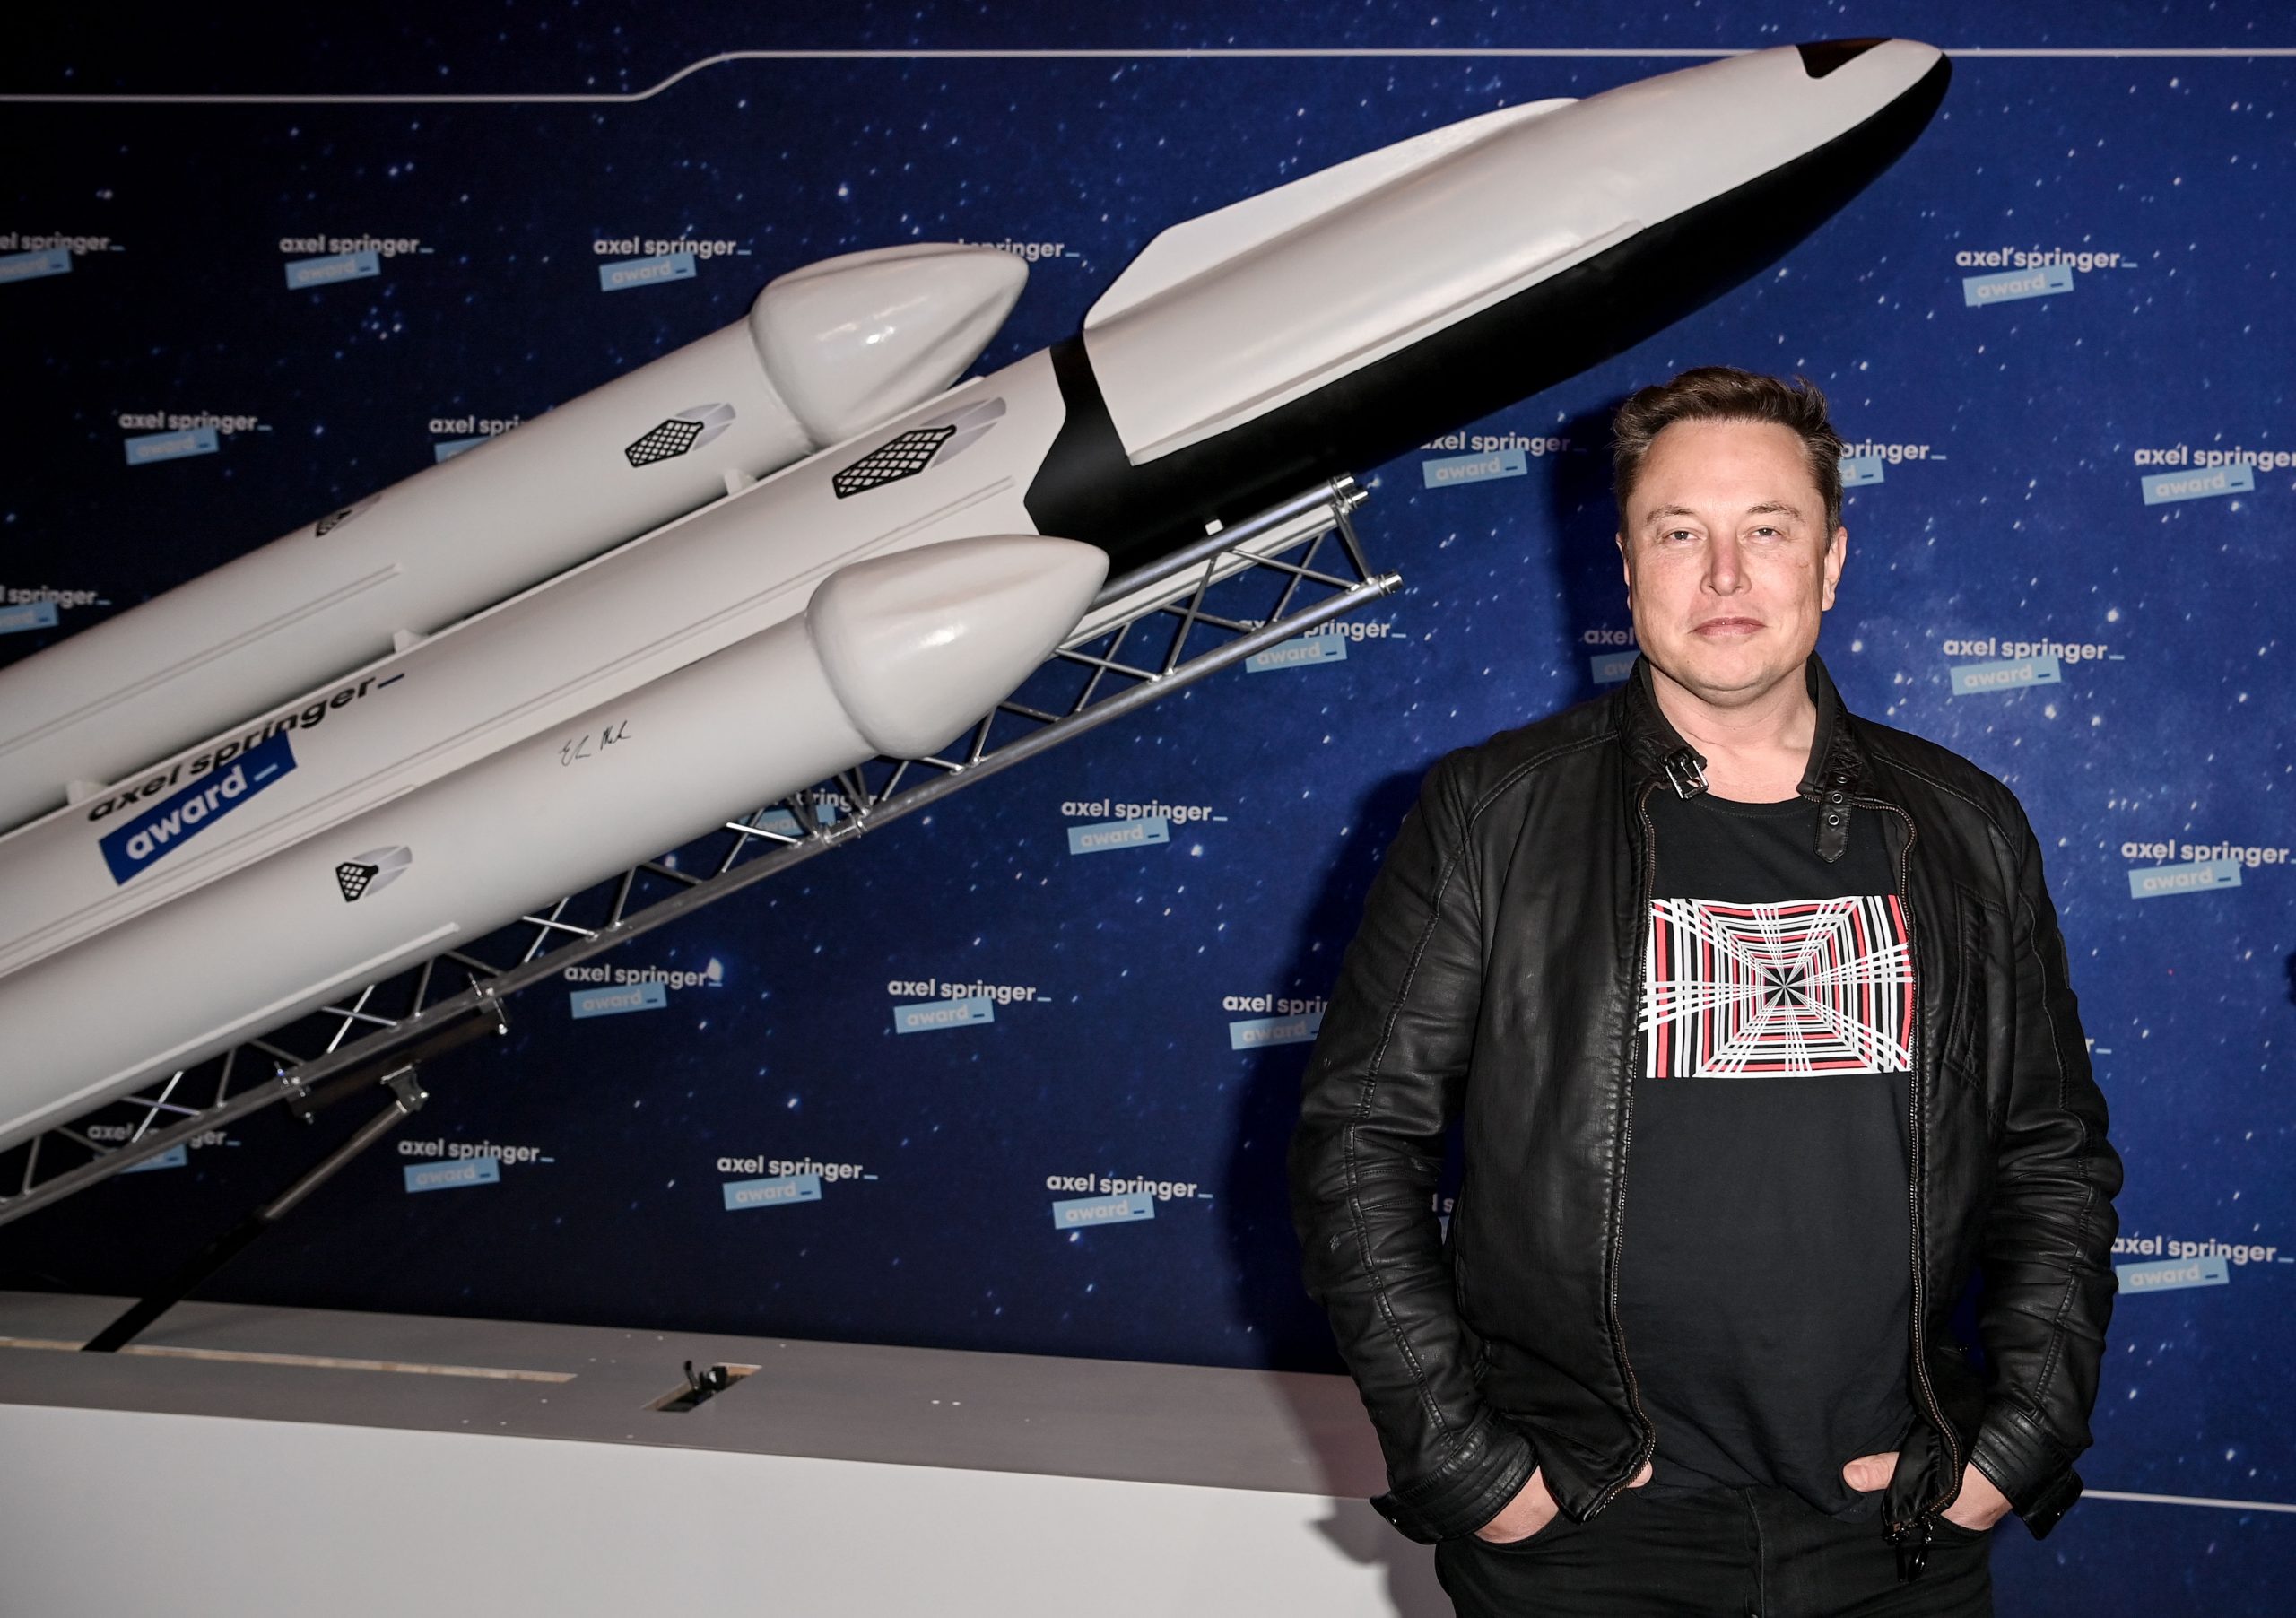 Elon Musk’s SpaceX to launch world’s first mission to space with all-civilian crew